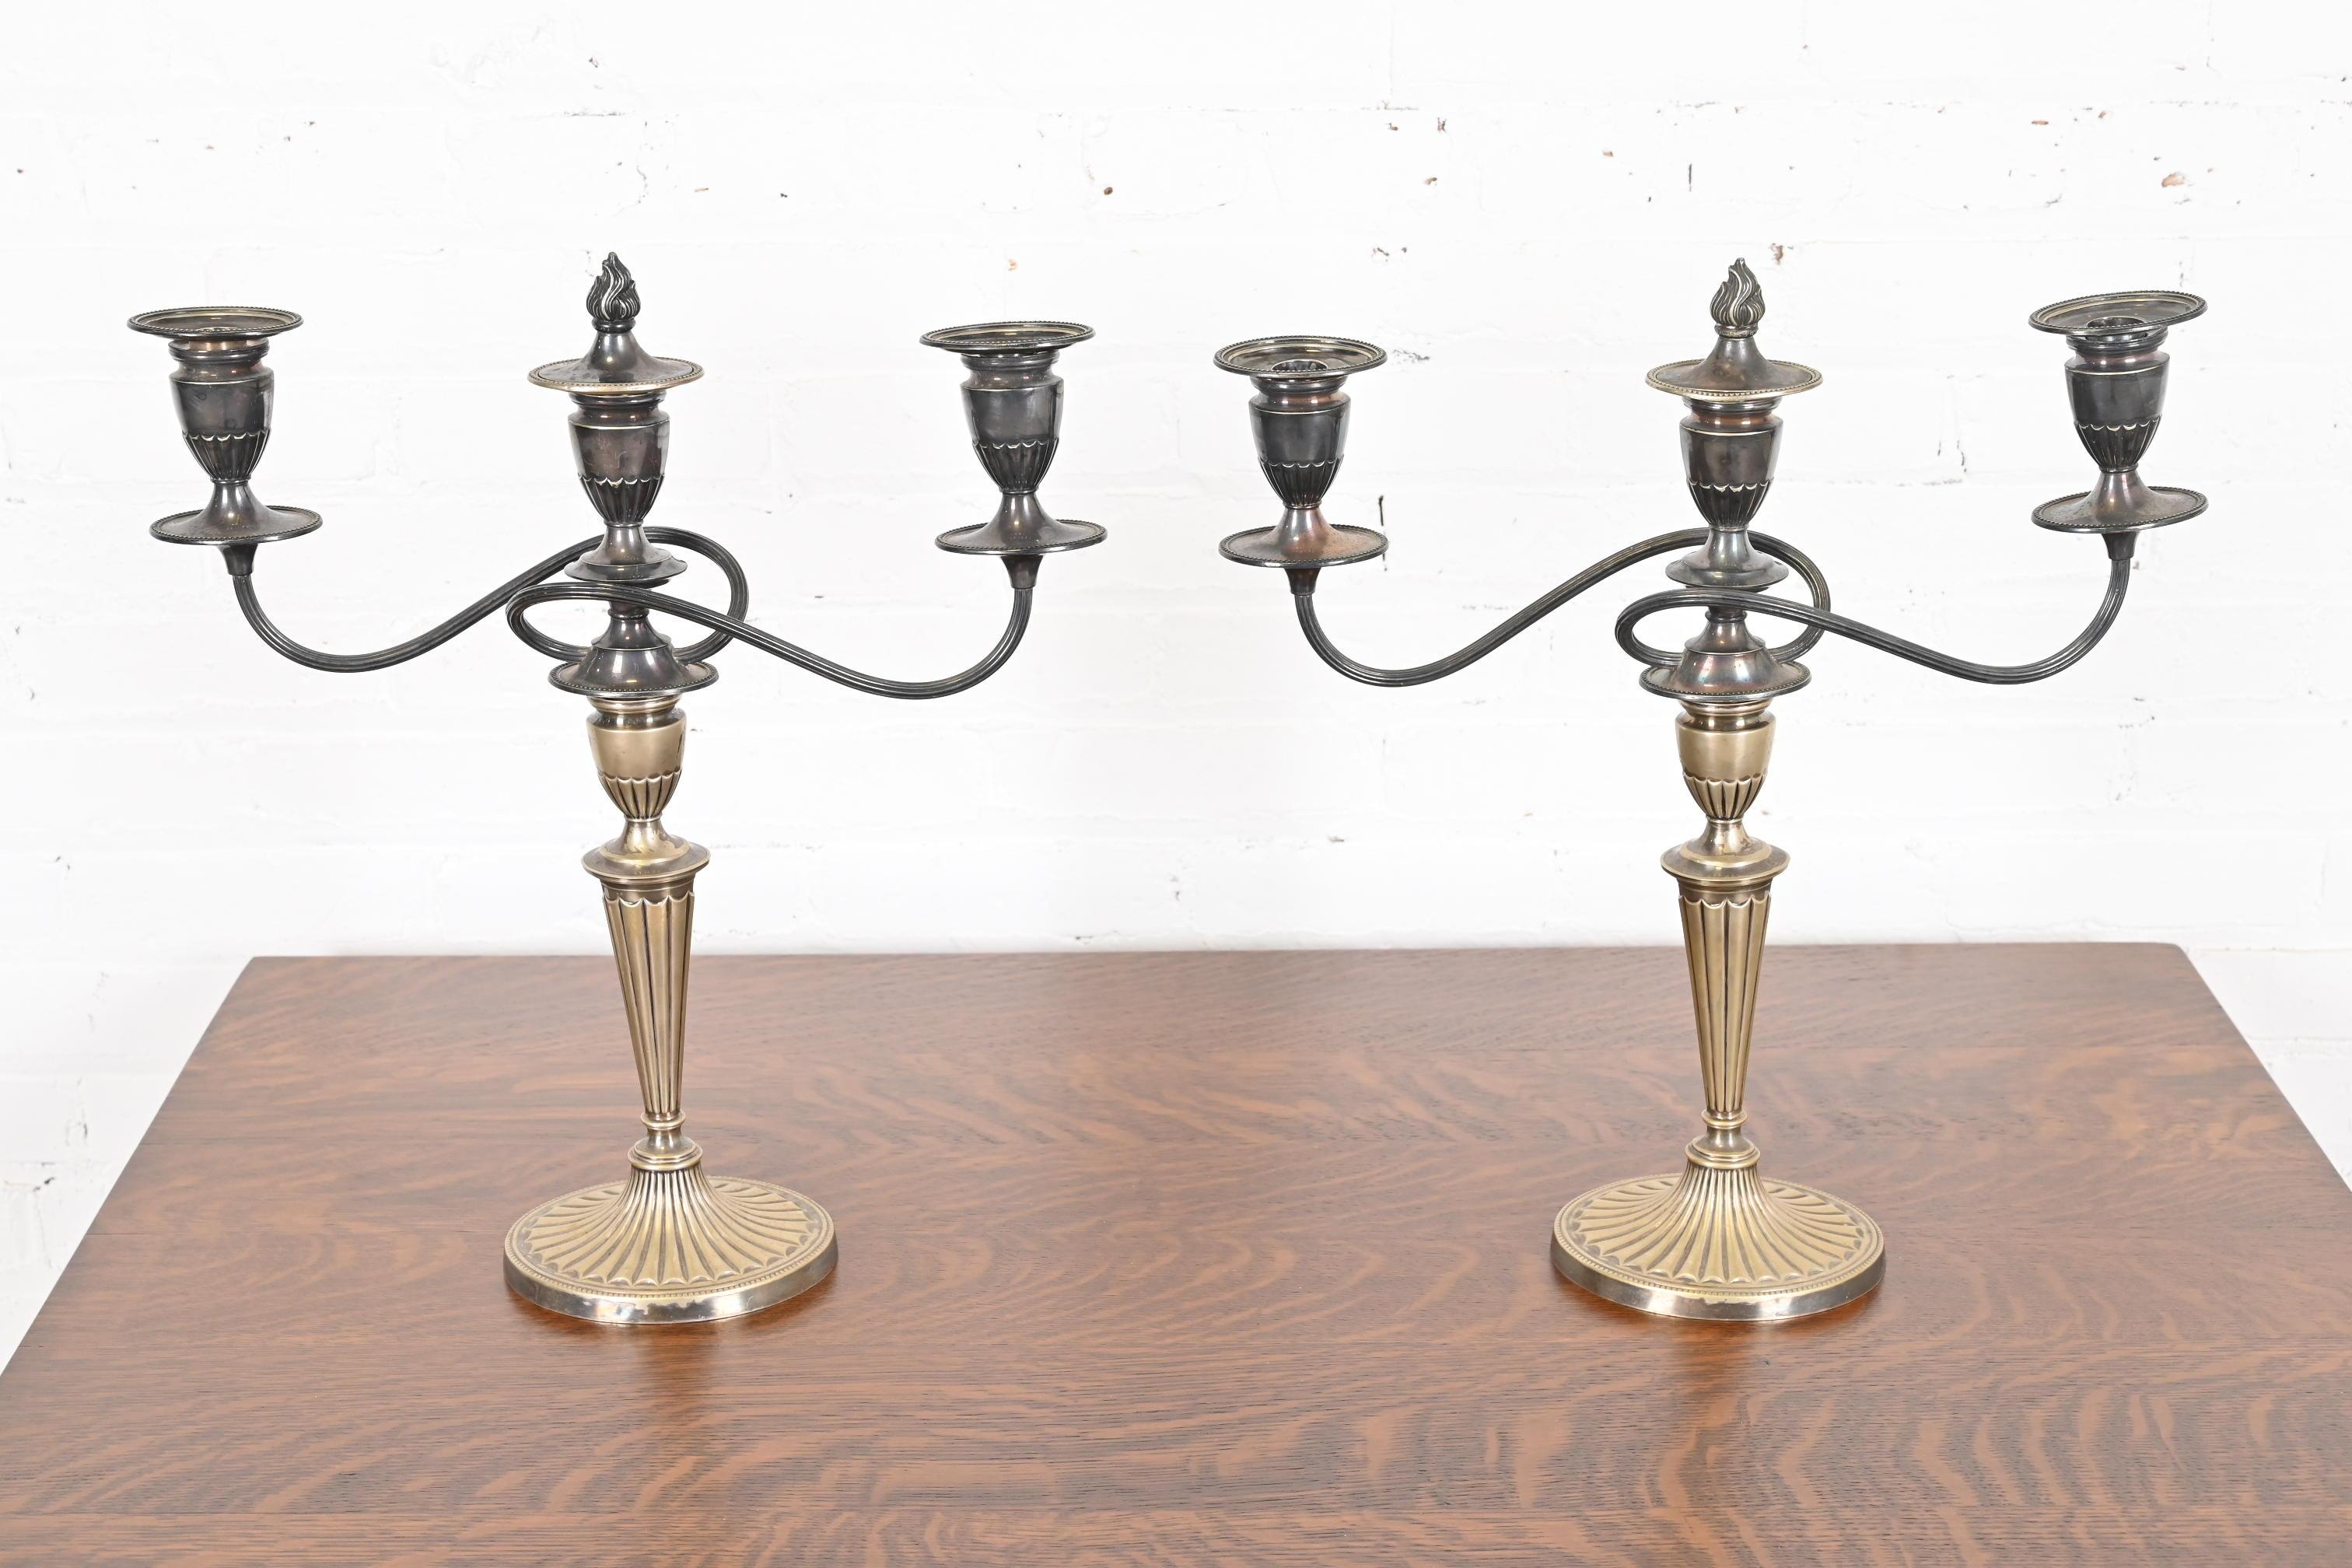 Gorham Antique Regency Silver Two-Arm Candelabra, Pair In Good Condition For Sale In South Bend, IN